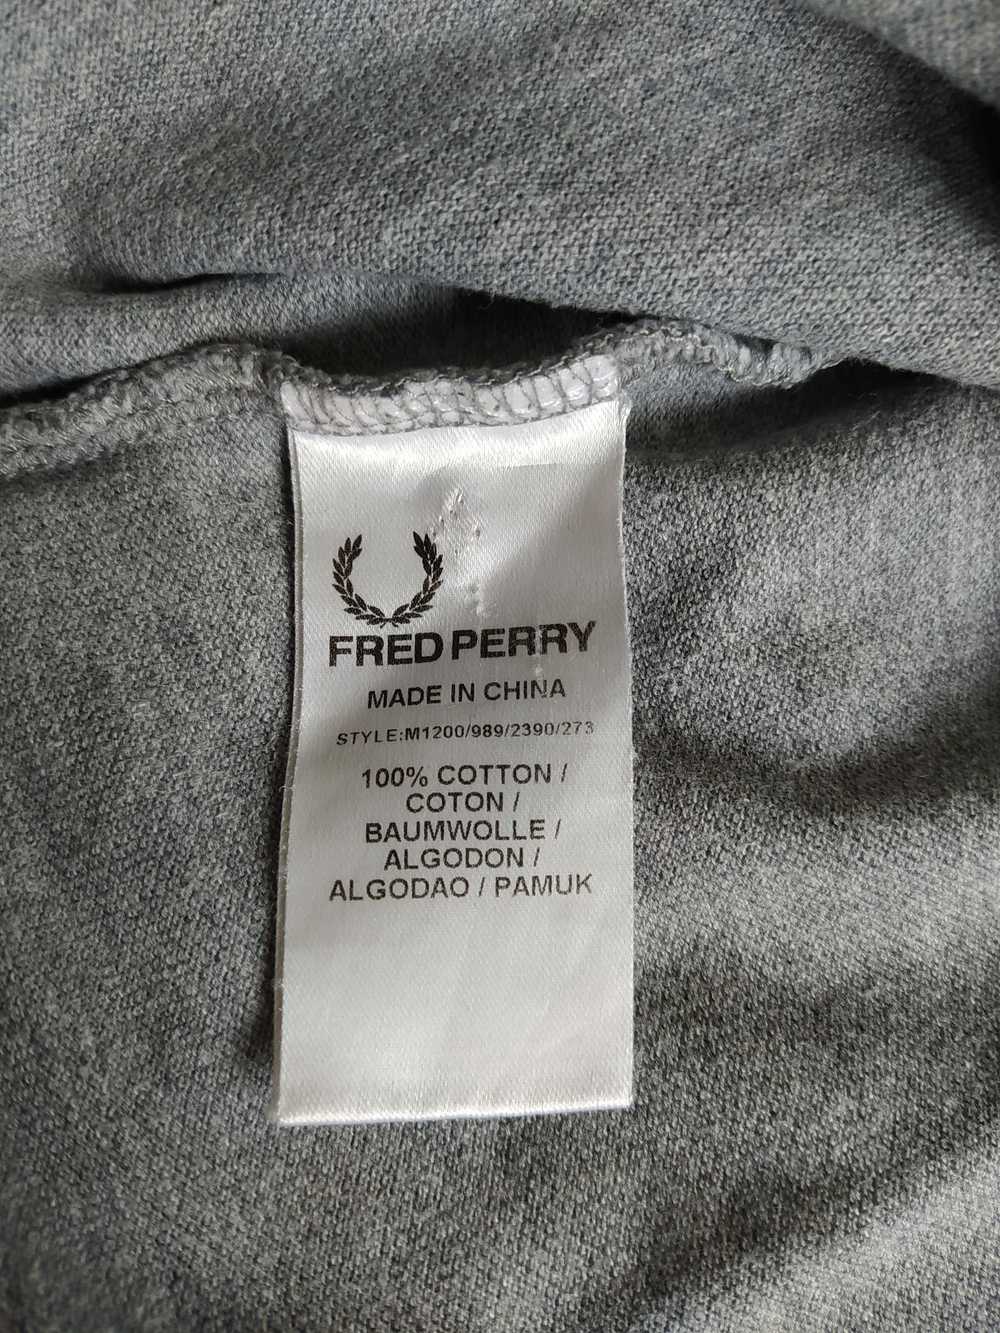 Fred Perry × Streetwear Grey pique polo t-shirt S - image 8